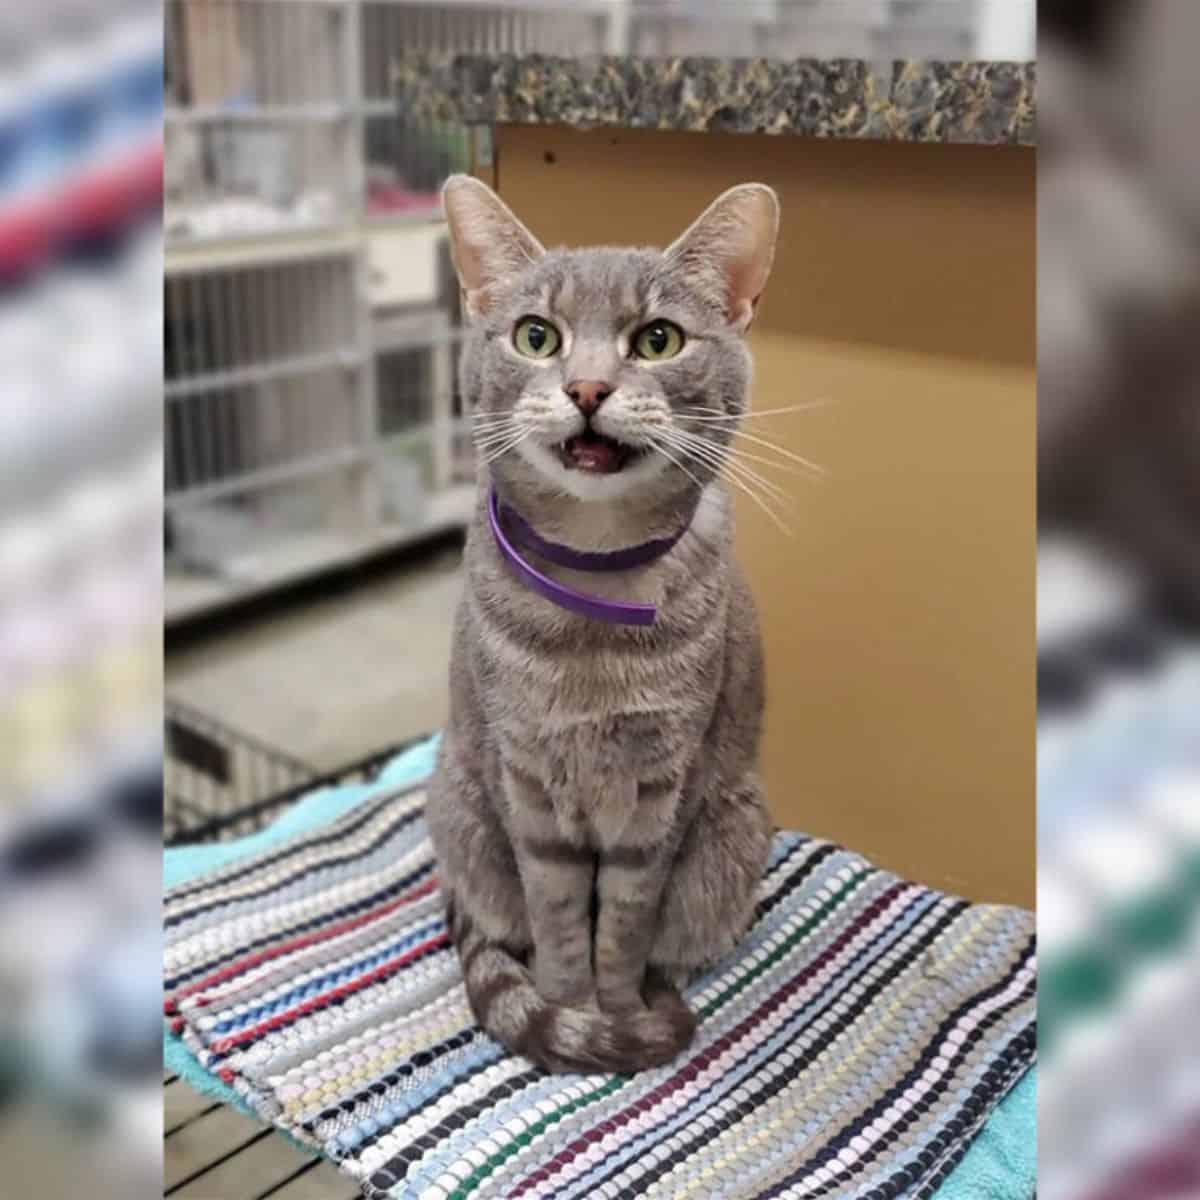 a smiling cat sits on a colorful carpet and looks at the camera